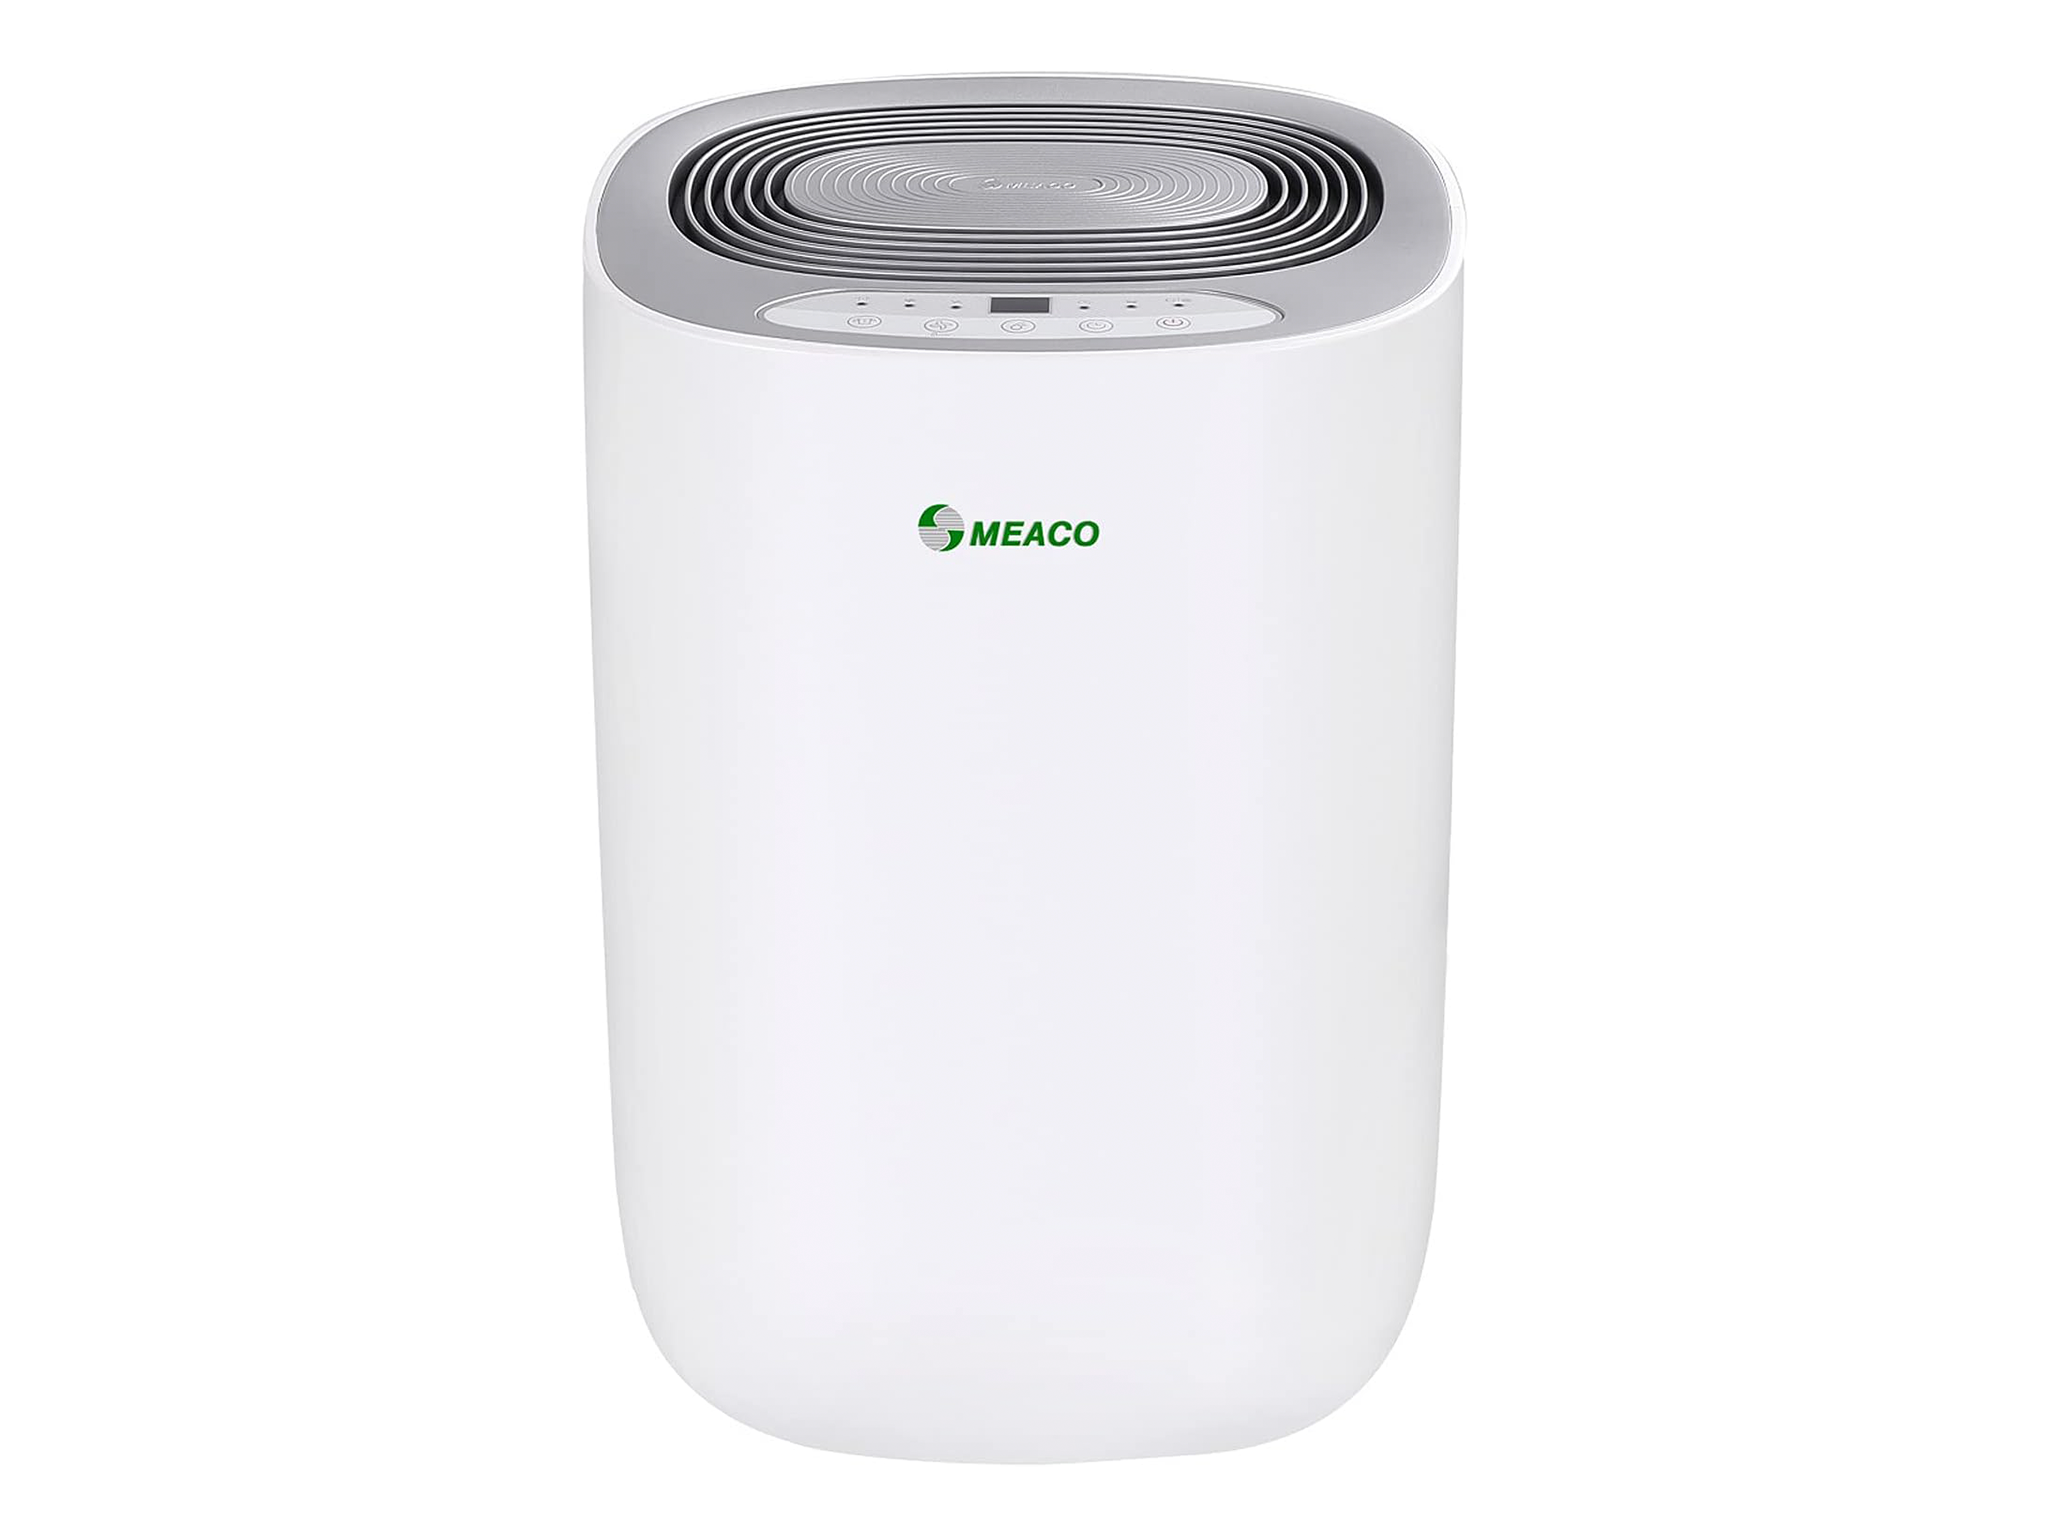 Meaco-dehumidifier-indybest